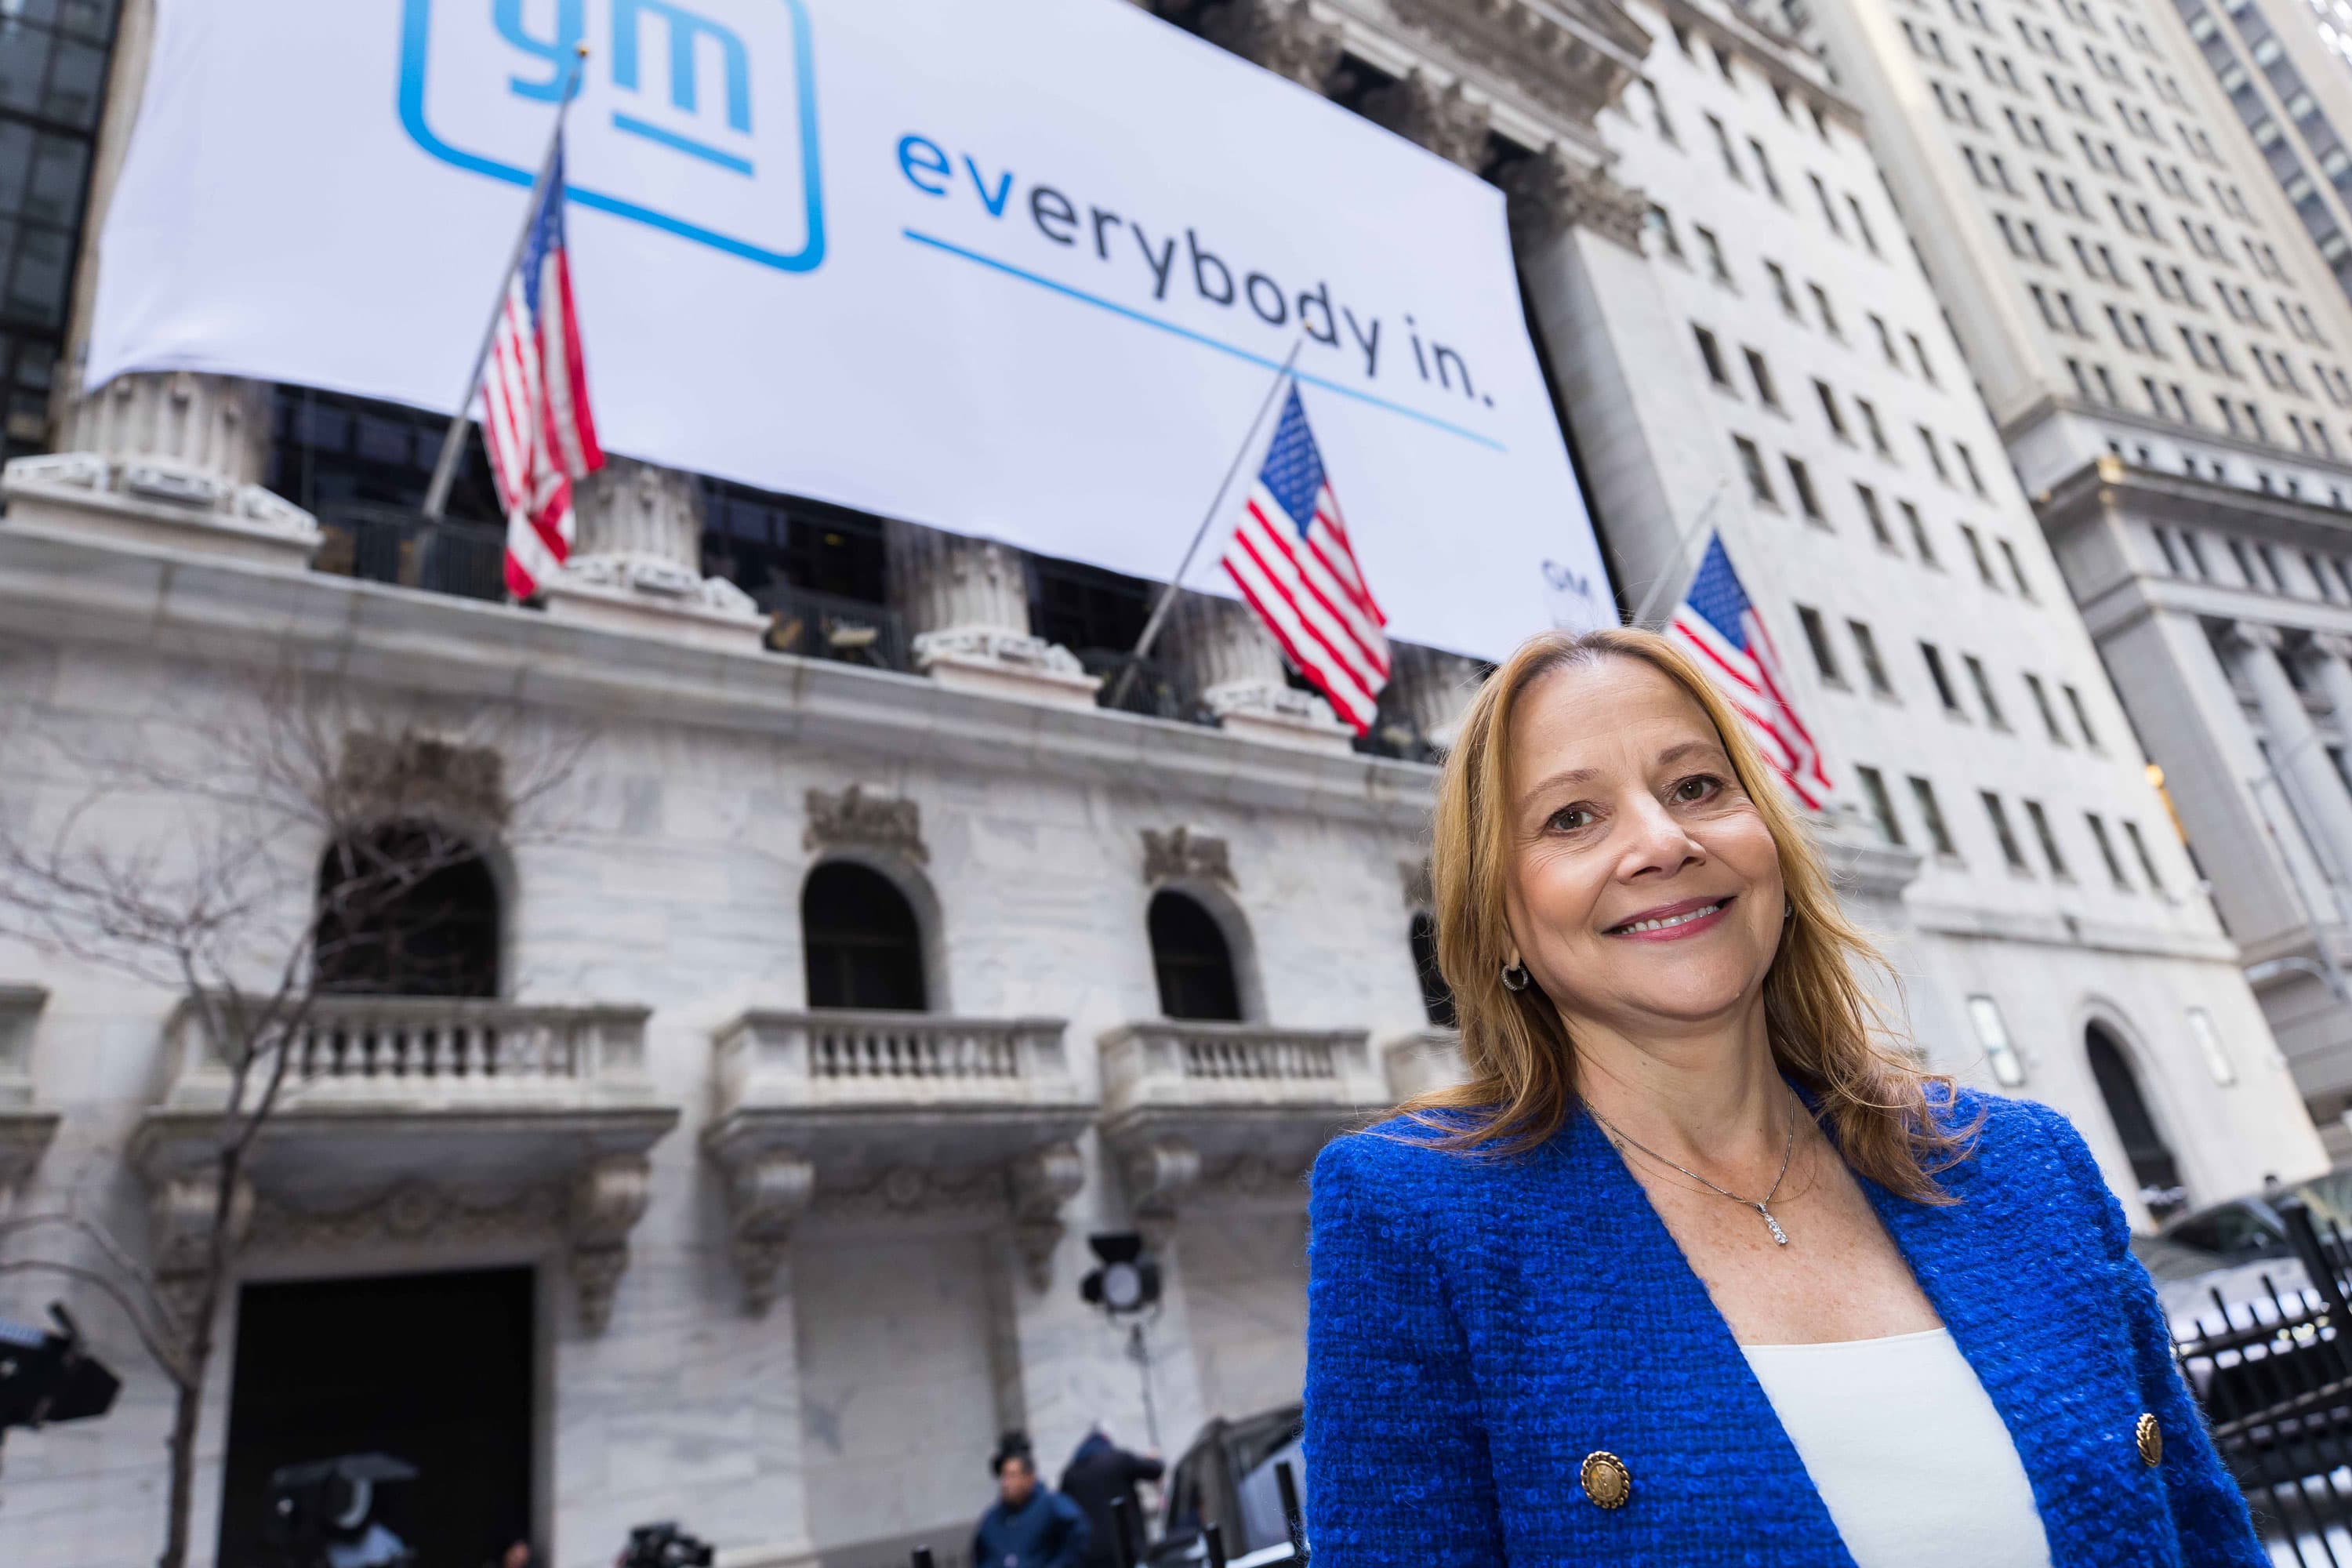  GM has some skeptics on Wall Street about its ambitious EV plans